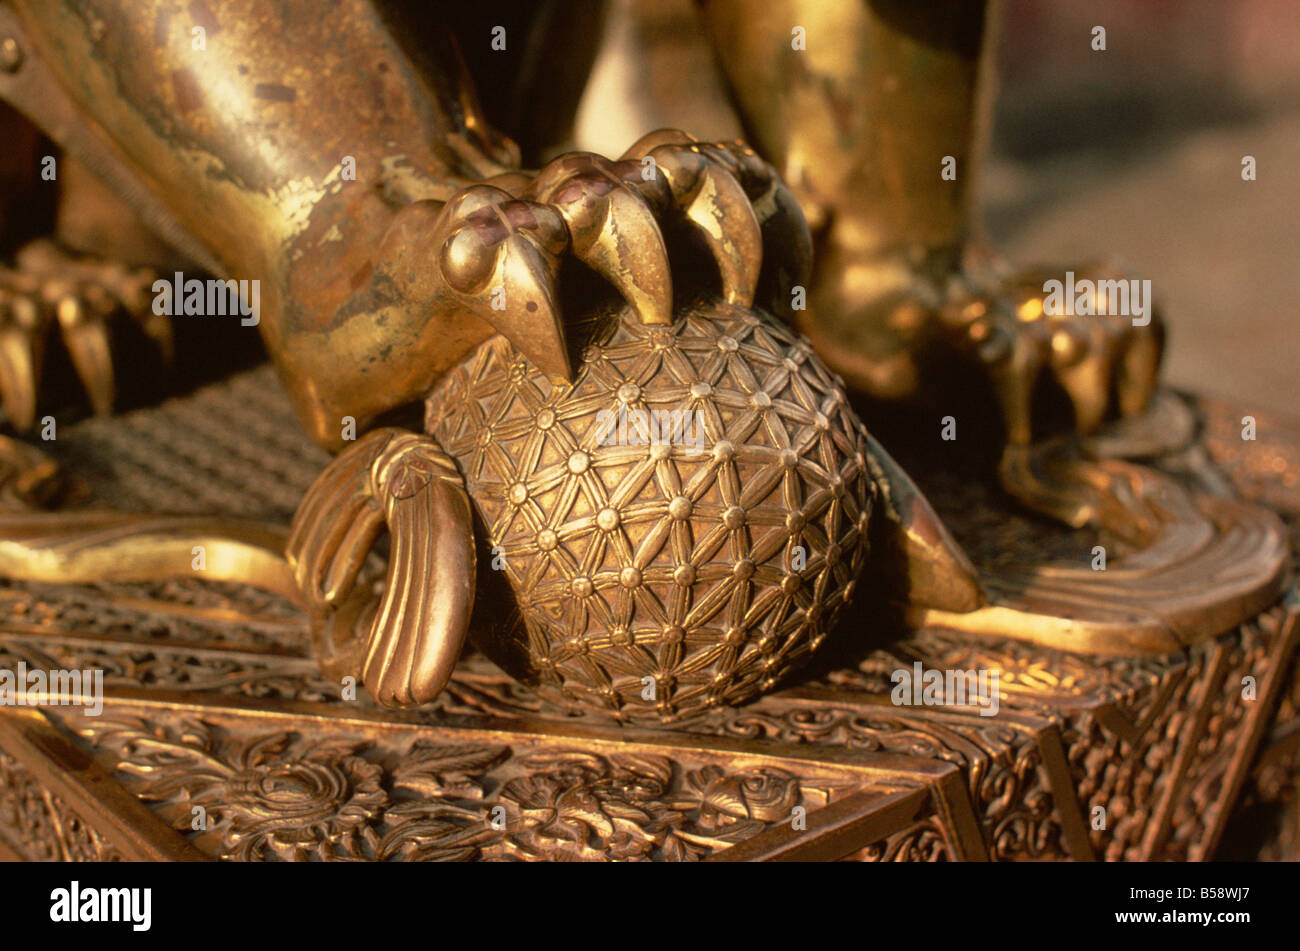 Close-up of the paw of a gilt bronze lion holding a fire ball, symbol of force, in the Forbidden City in Beijing, China Stock Photo